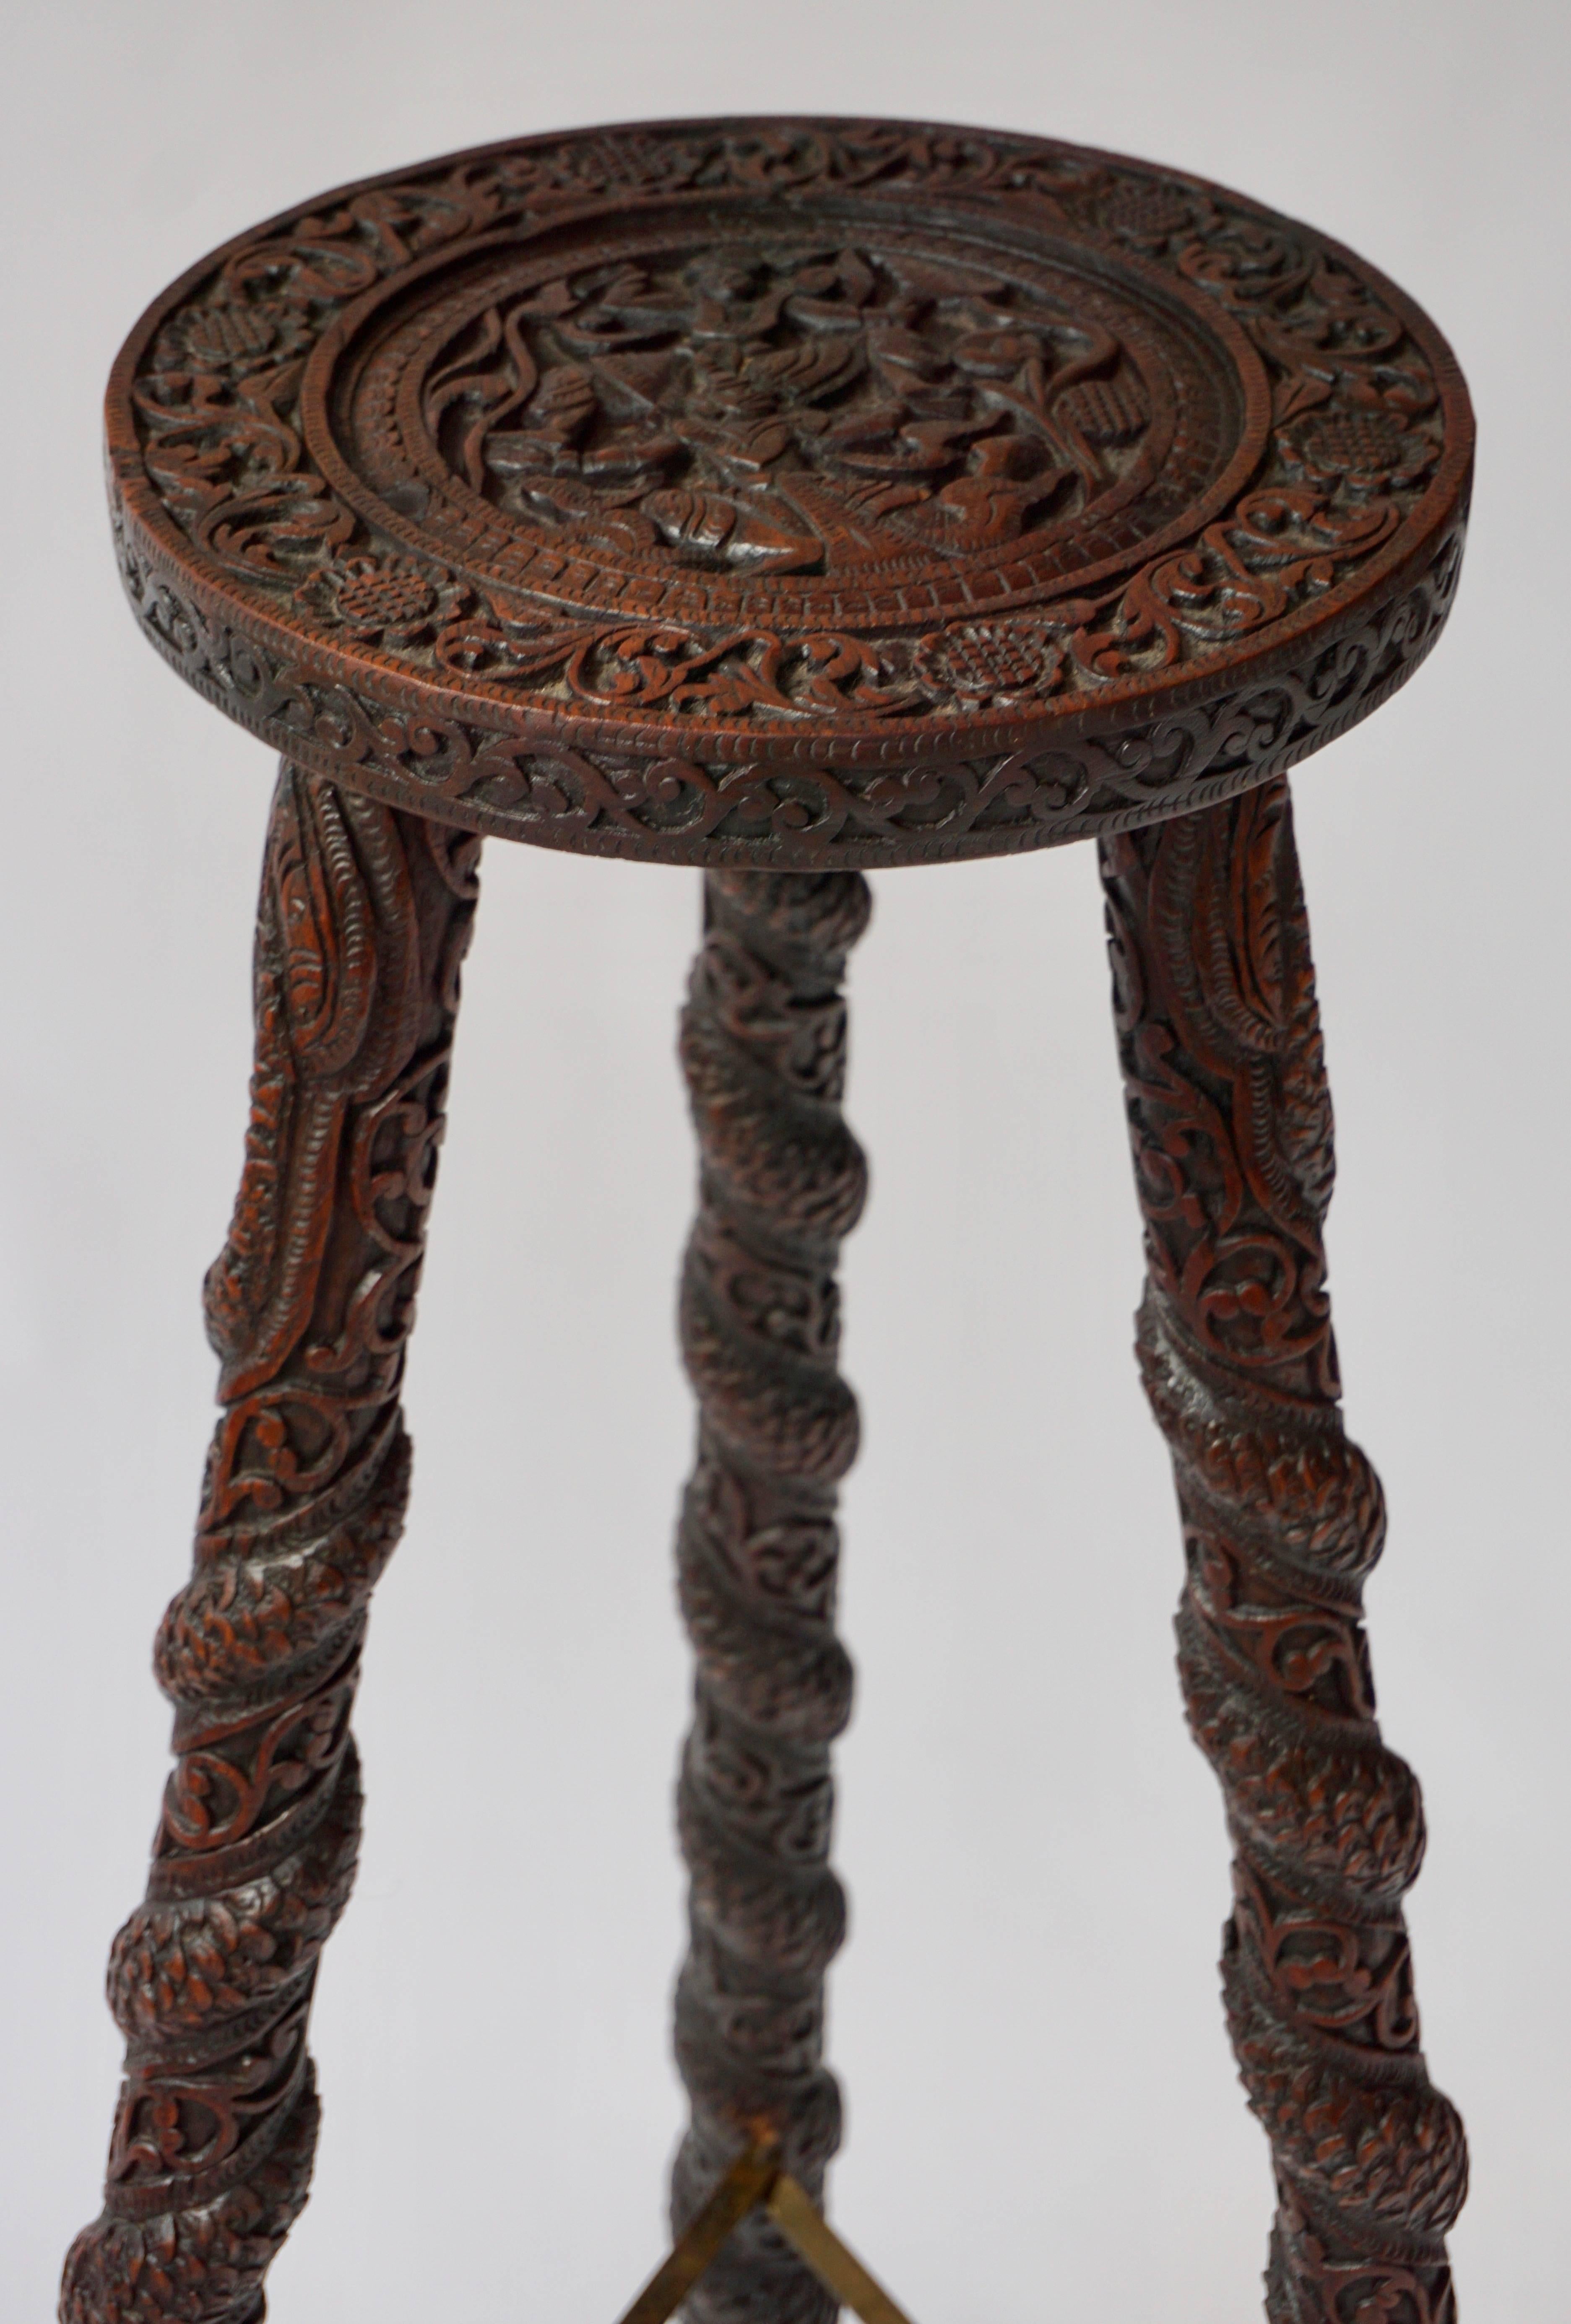 20th Century Carved Pedestal Table, India